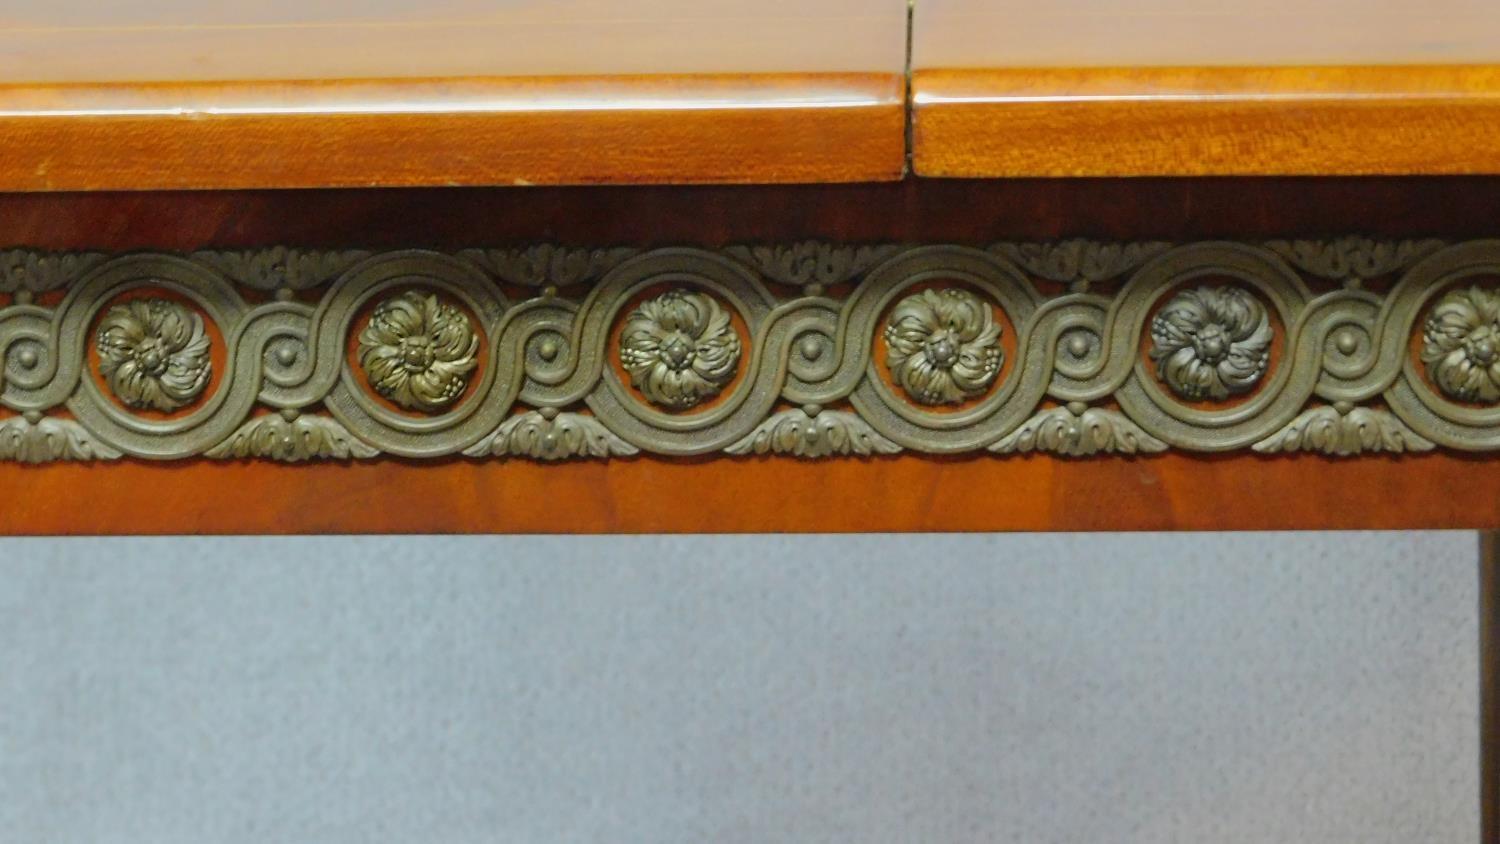 A Continental flame mahogany extending dining table with brass mounts and central floral inlay - Image 4 of 6